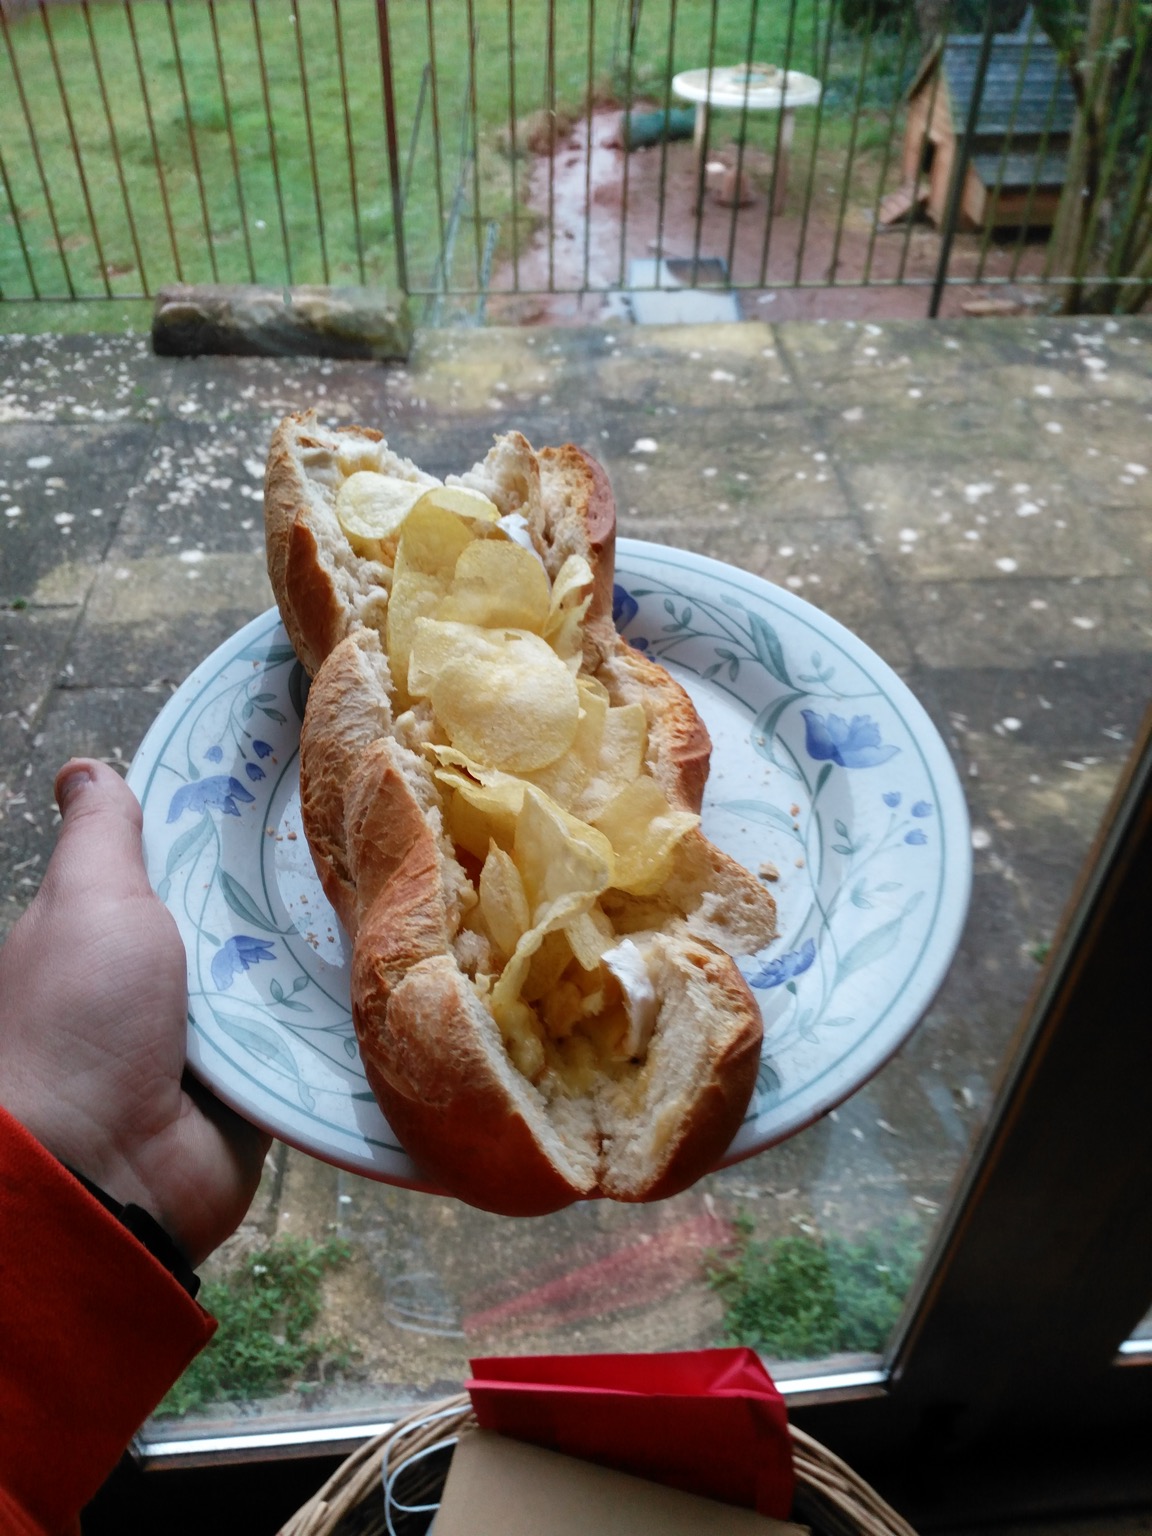 Potato crisps and cheese in a baguette